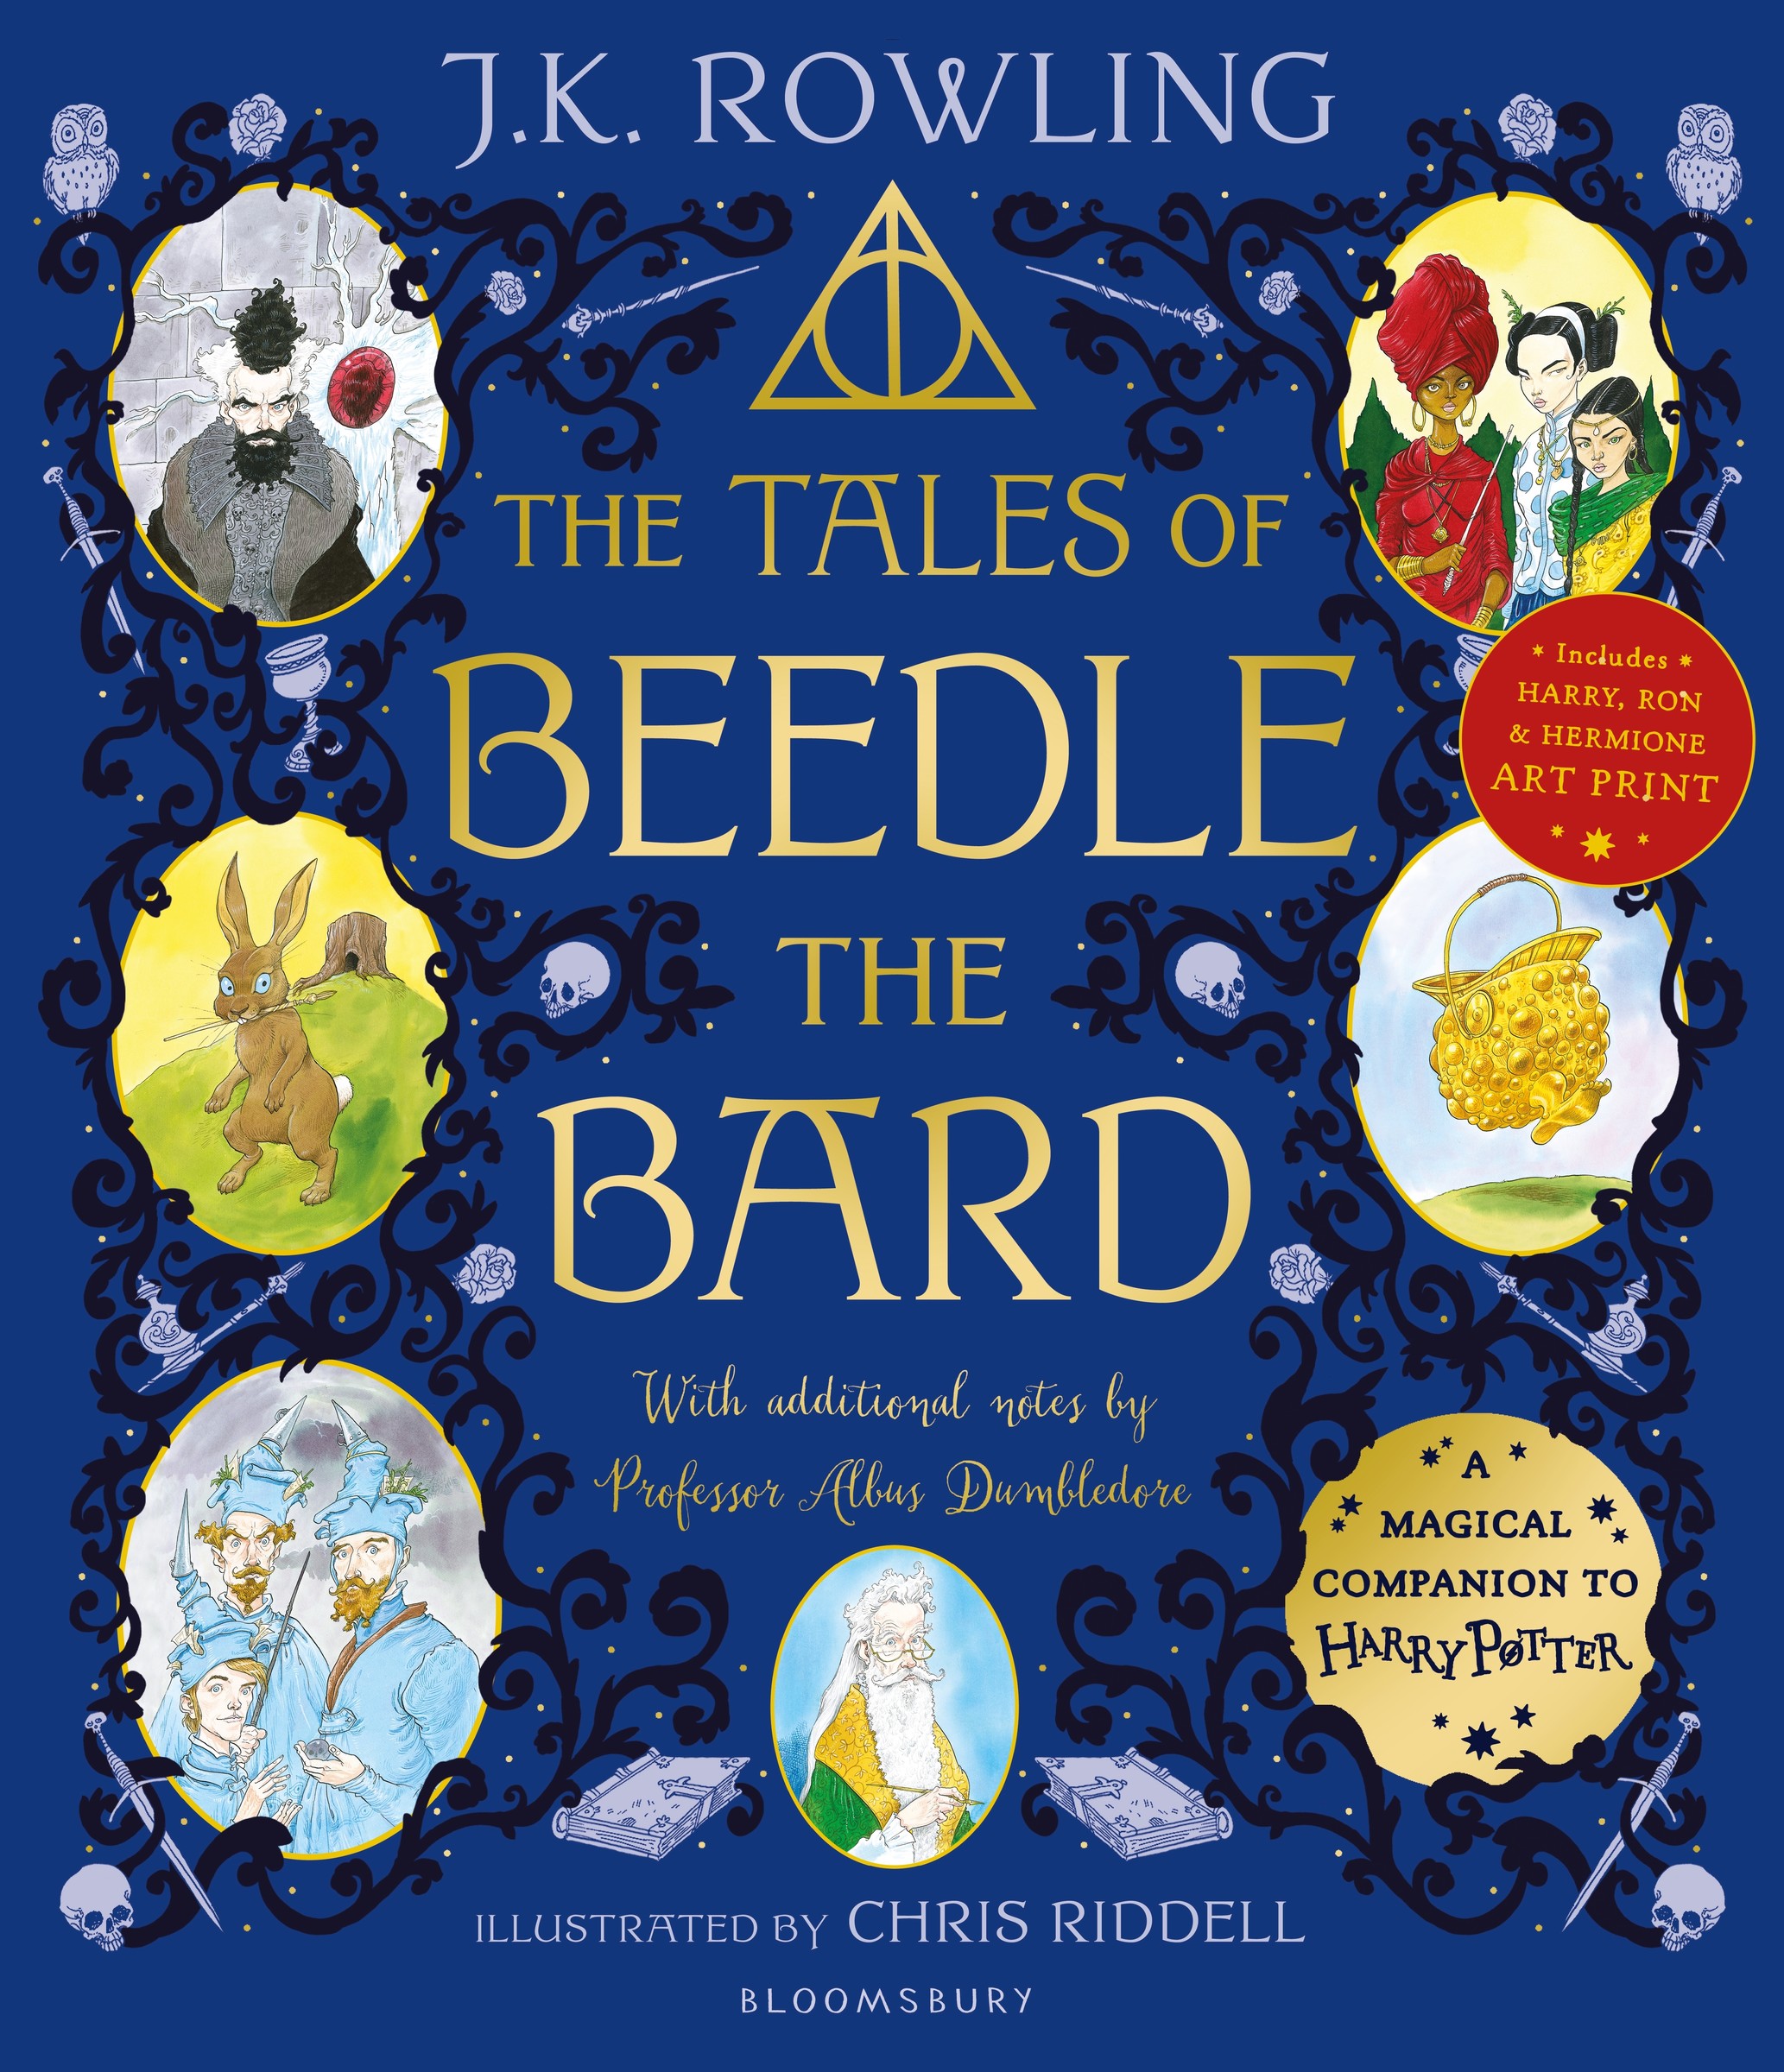 The Tales of Beedle the Bard - Illustrated Edition : A magical companion to the Harry Potter stories | 9-12 years old